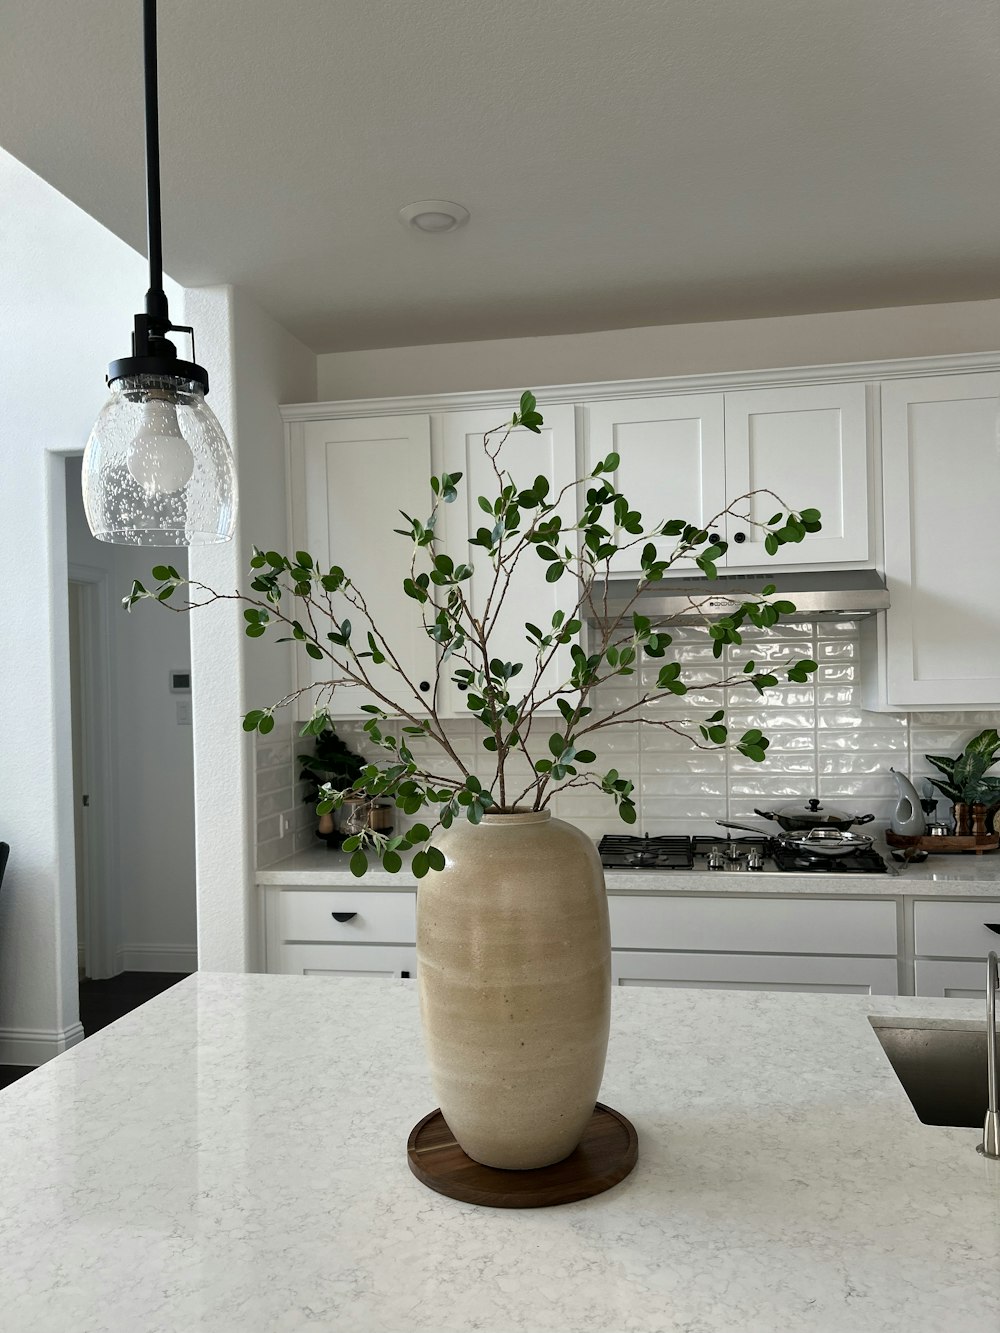 a vase with a plant in it sitting on a kitchen counter